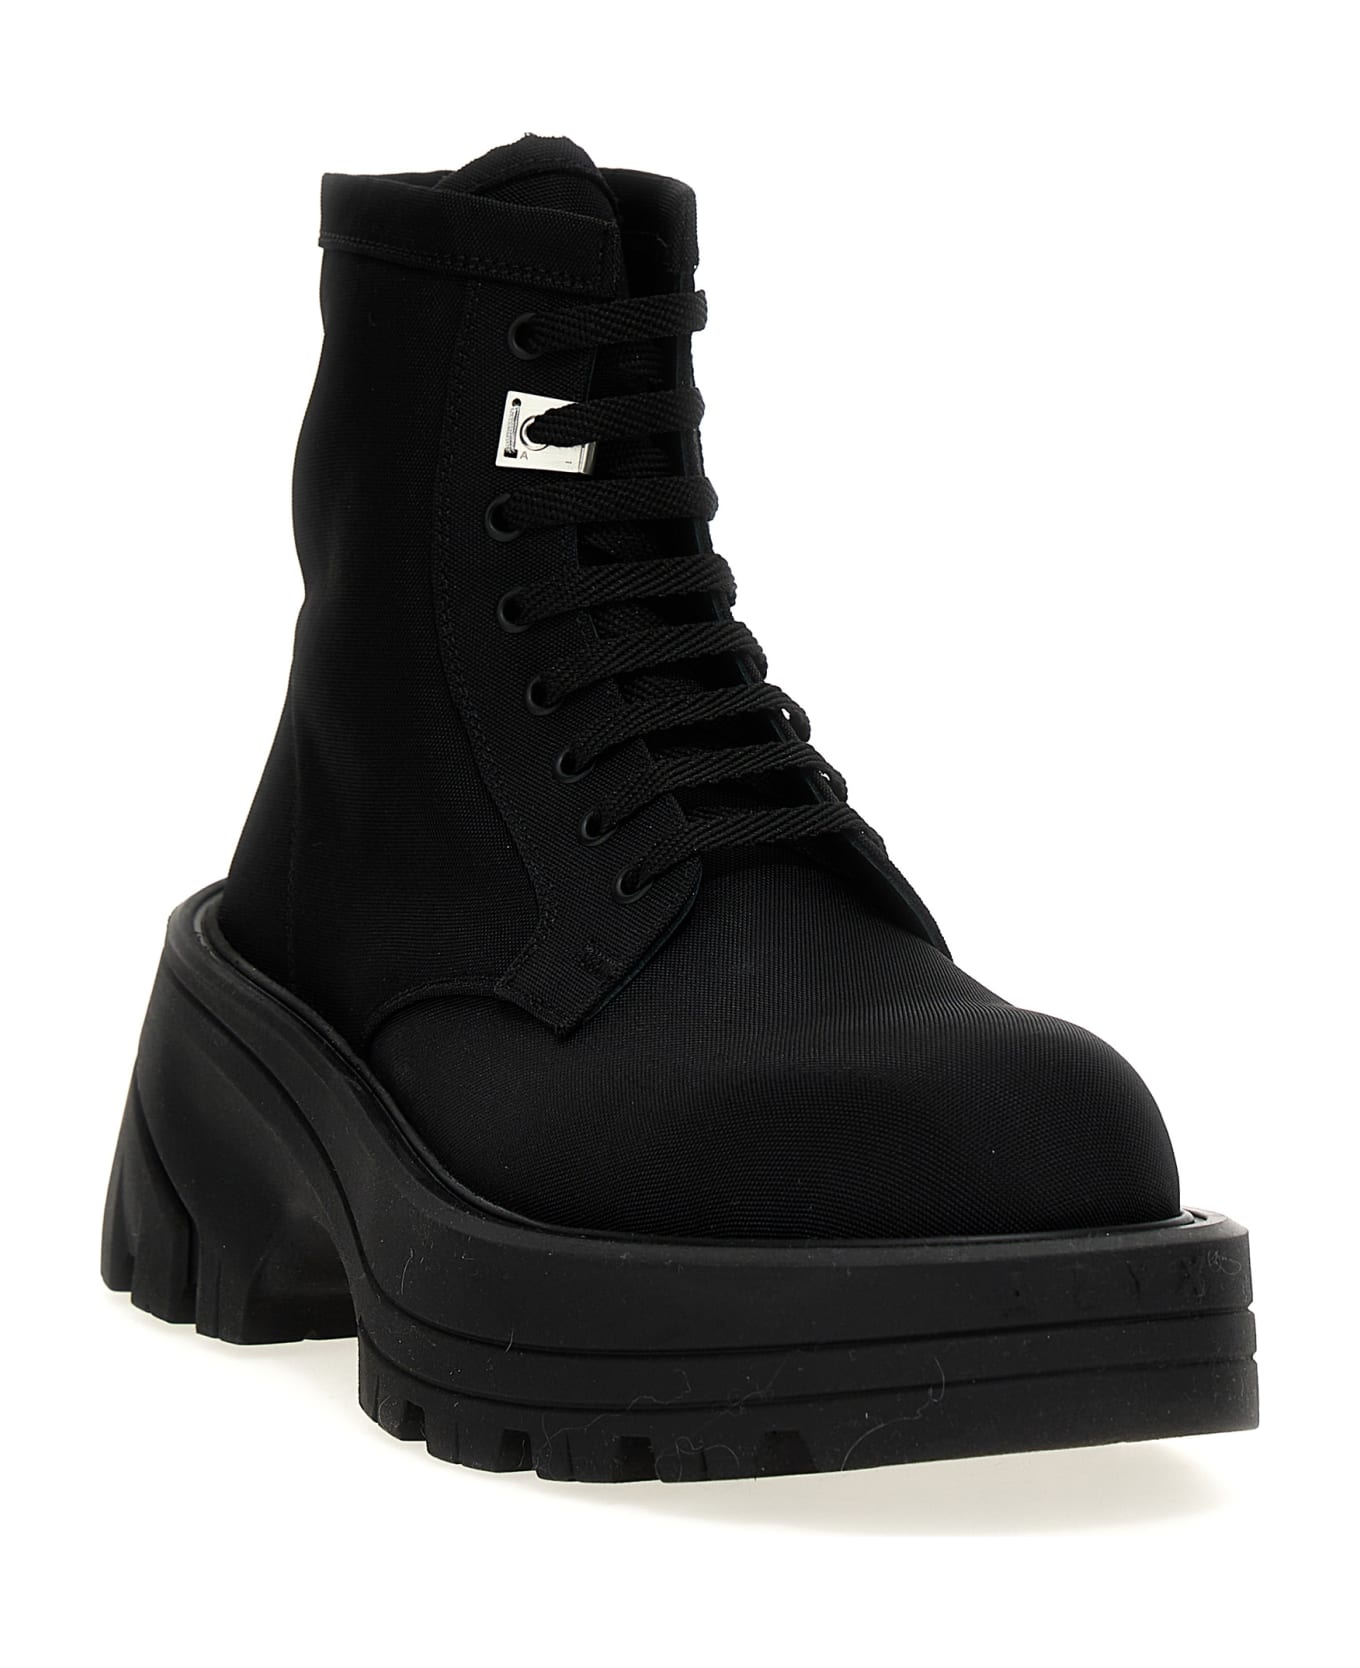 1017 ALYX 9SM 'paraboot' Ankle Boots - Black